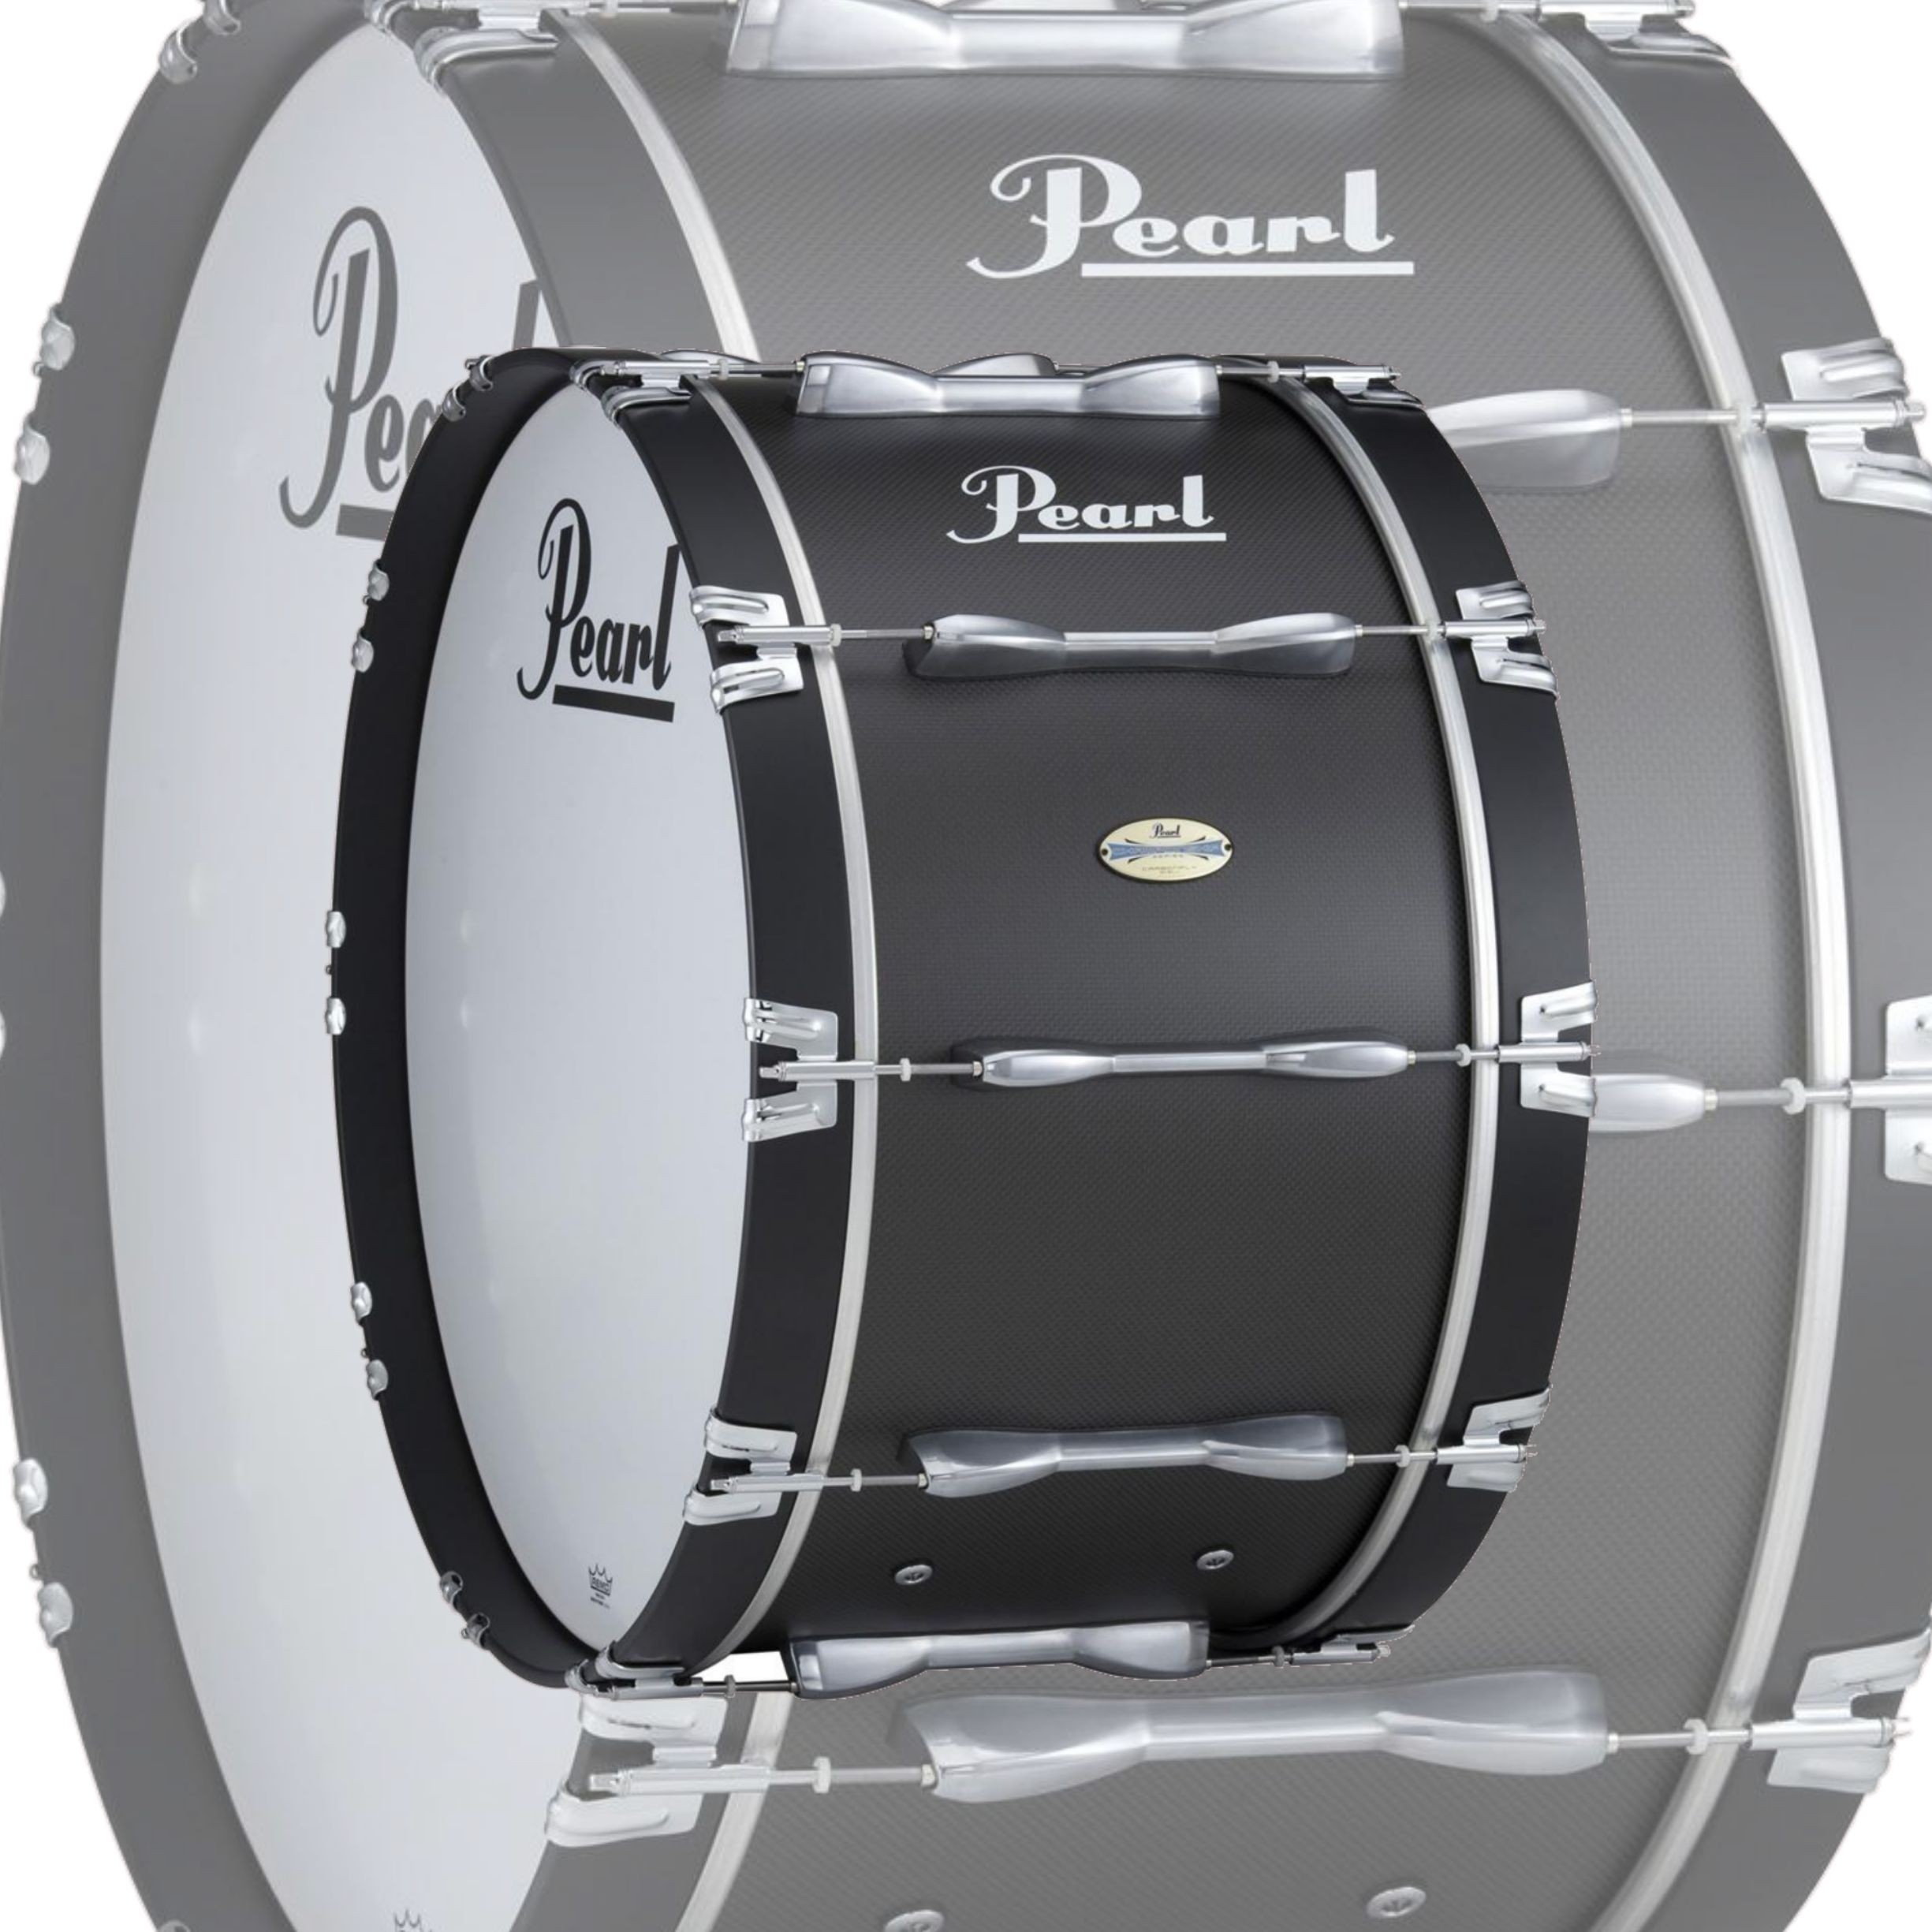 Pearl CarbonPly Championship 20"x14"  Marching Bass Drum